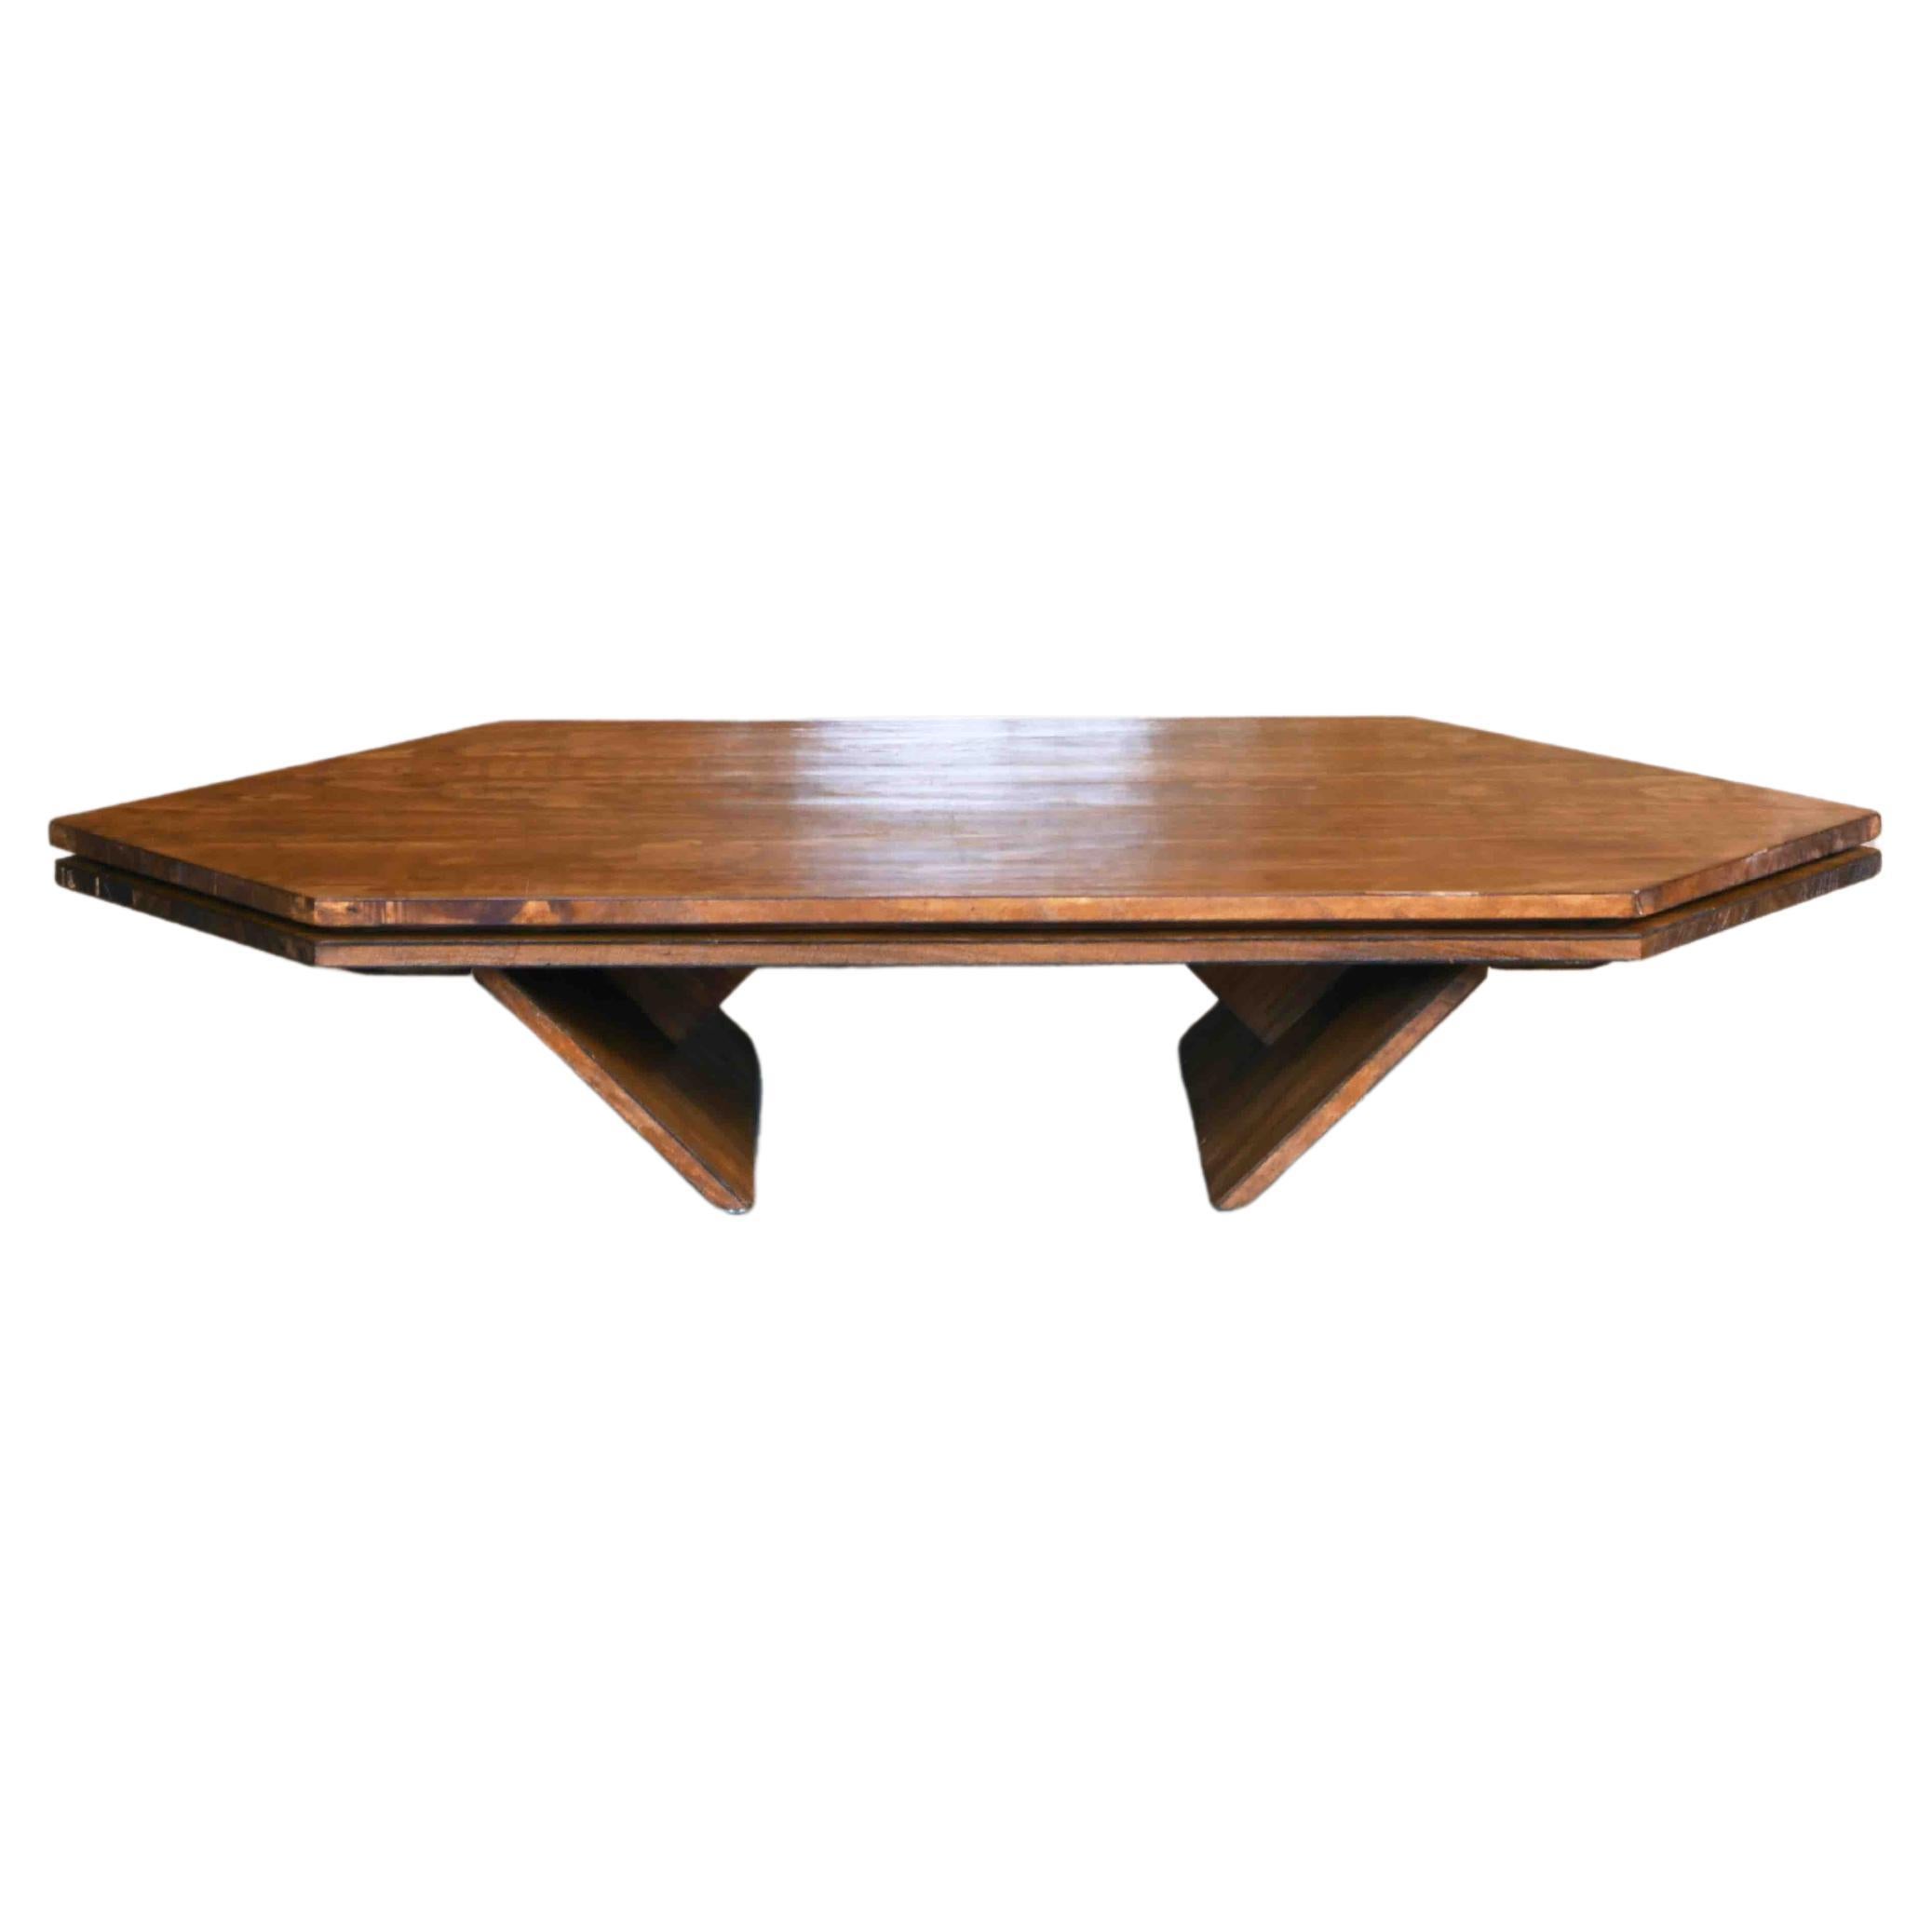 Hervé Baley, Wooden Coffee Table, C. 1991-1992 For Sale